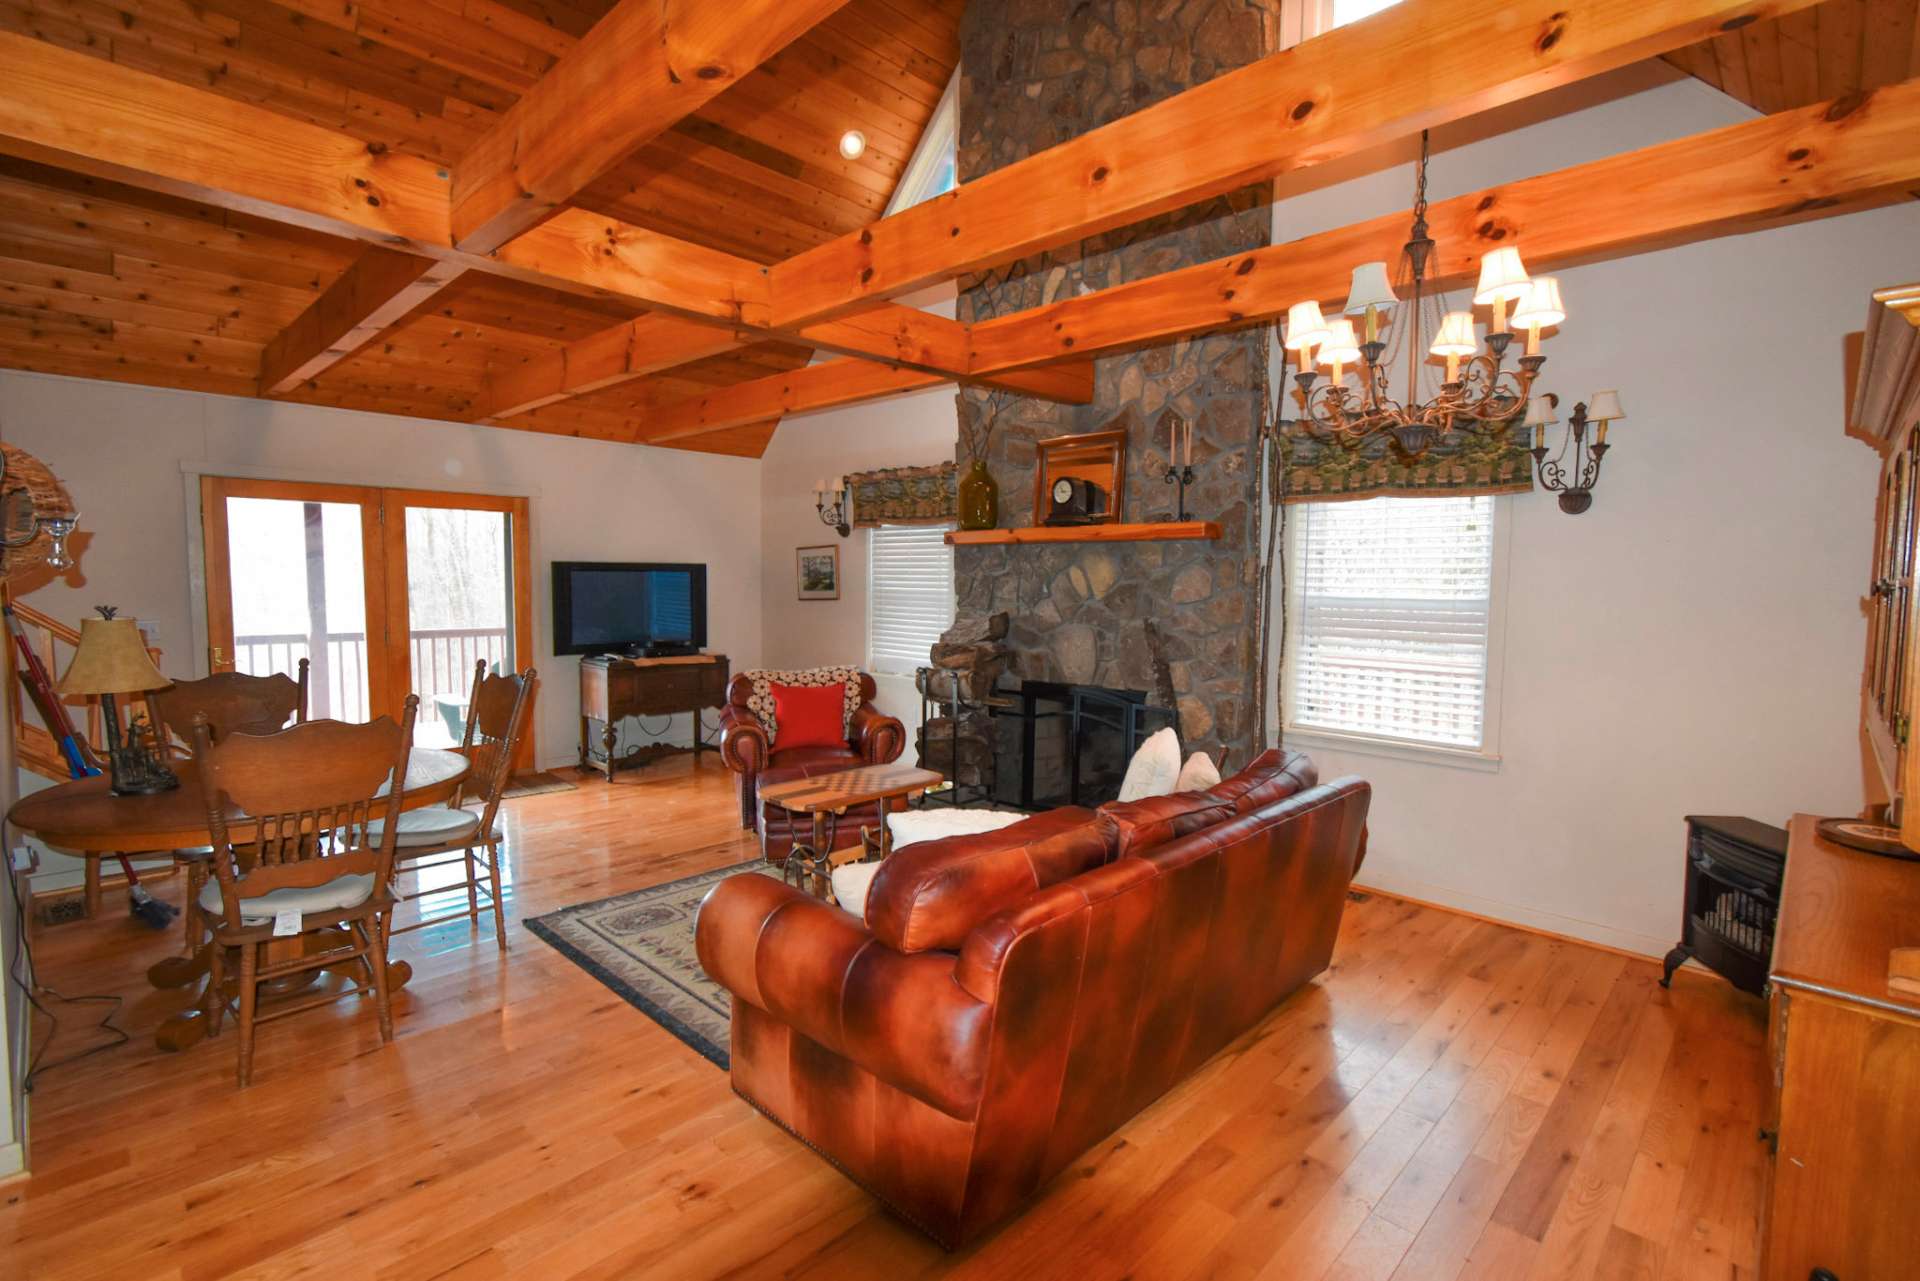 Relax in front of a crackling fire from this floor to ceiling stone fireplace in the great room. There is also a gas log stove for added comfort. With approximately 1,152 heated square feet of living space, this home is ideal for a private mountain get-a-way.